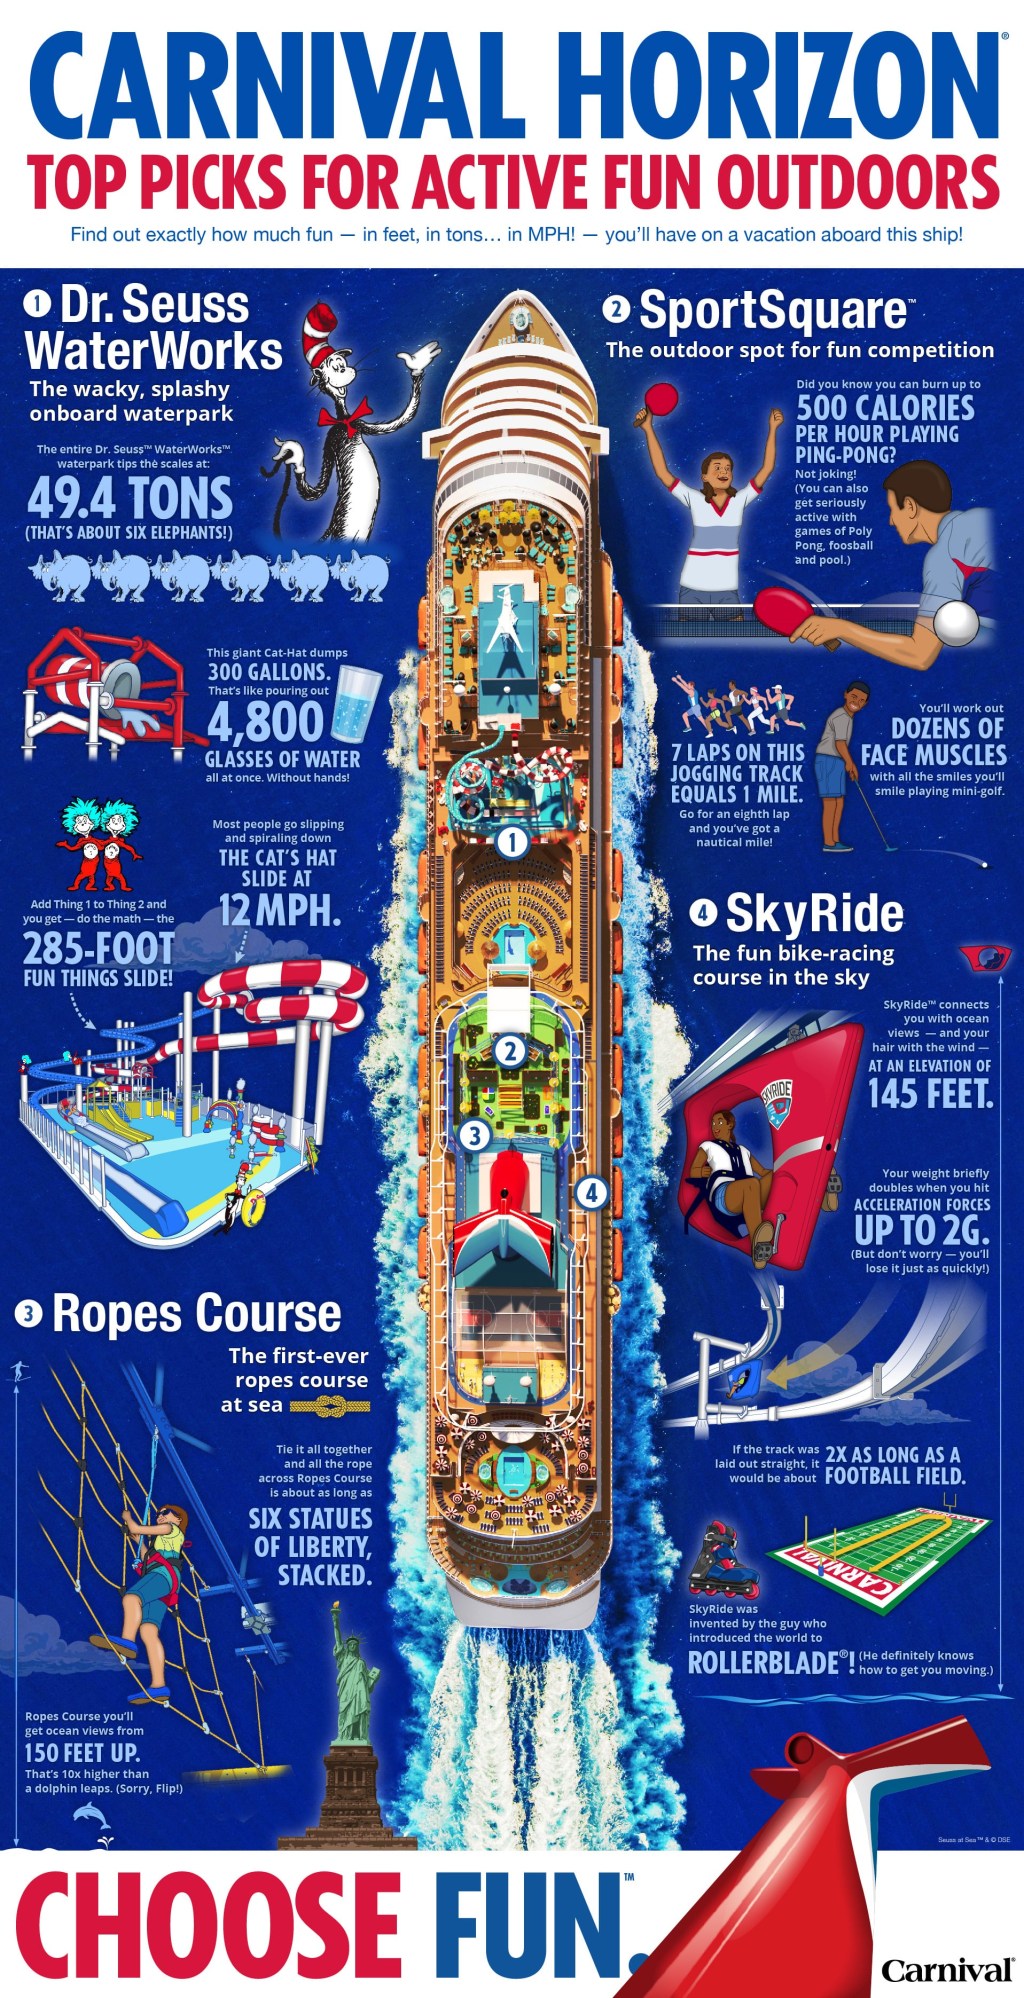 Picture of: Carnival Horizon: Top Picks for Active Fun Outdoors [Infographic